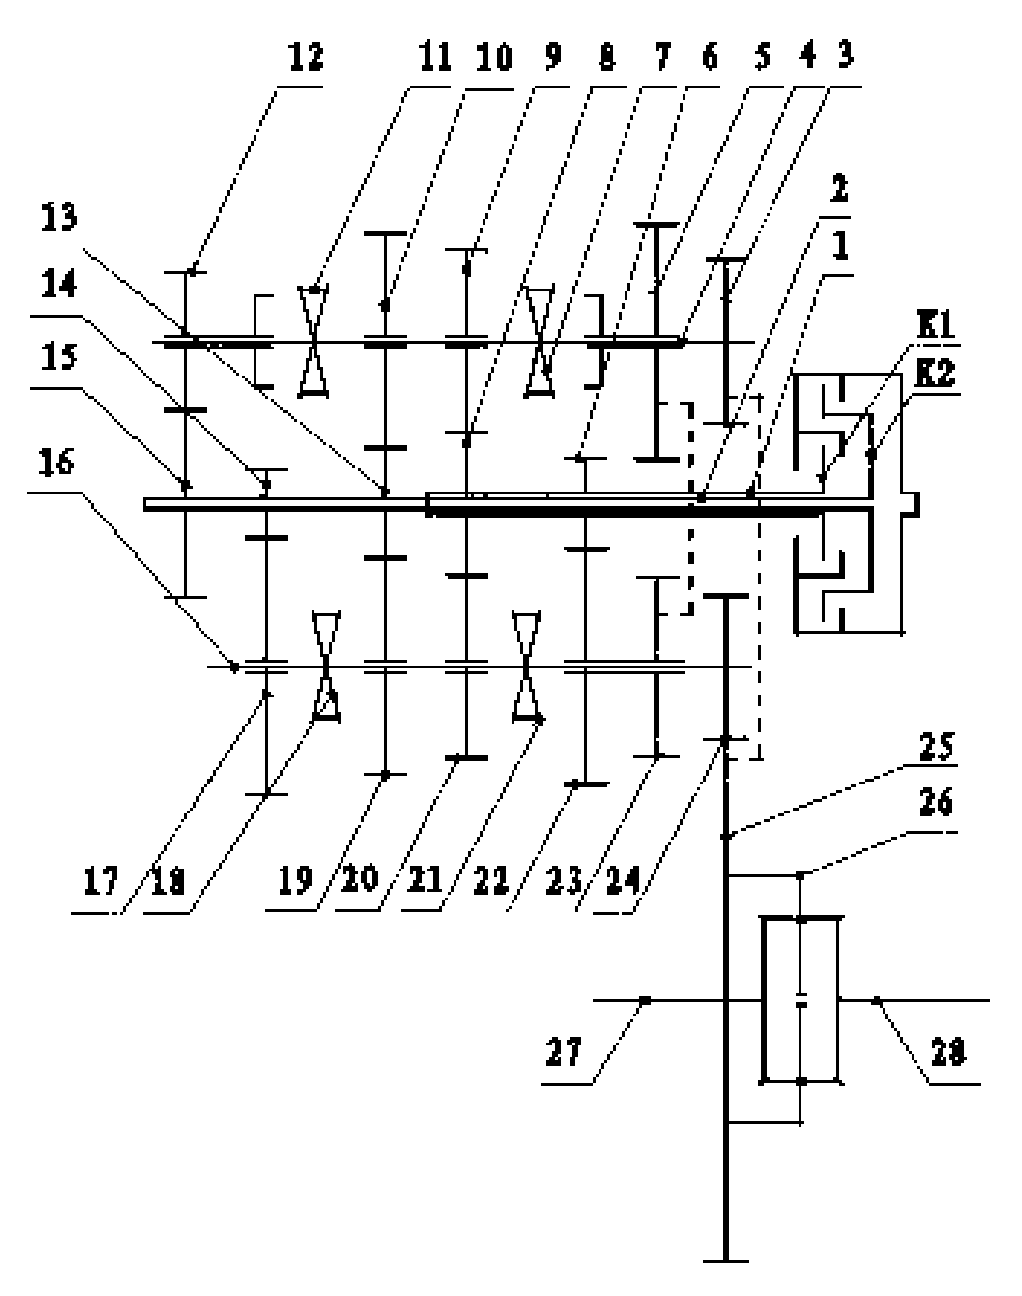 Double-clutch automatic transmission without reverse gear shaft